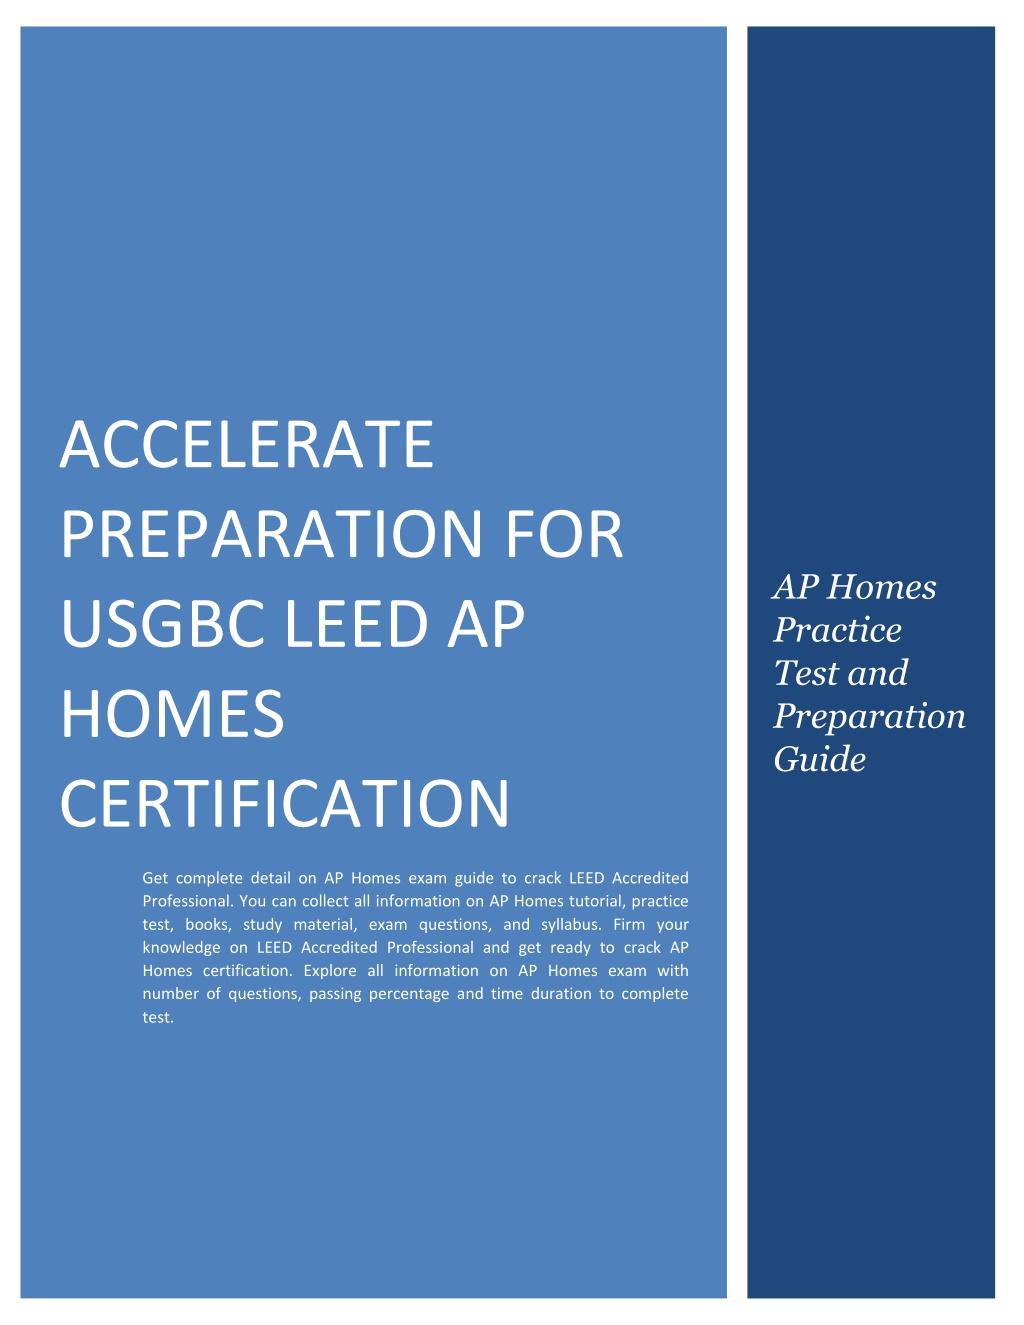 accelerate preparation for usgbc leed ap homes l.w